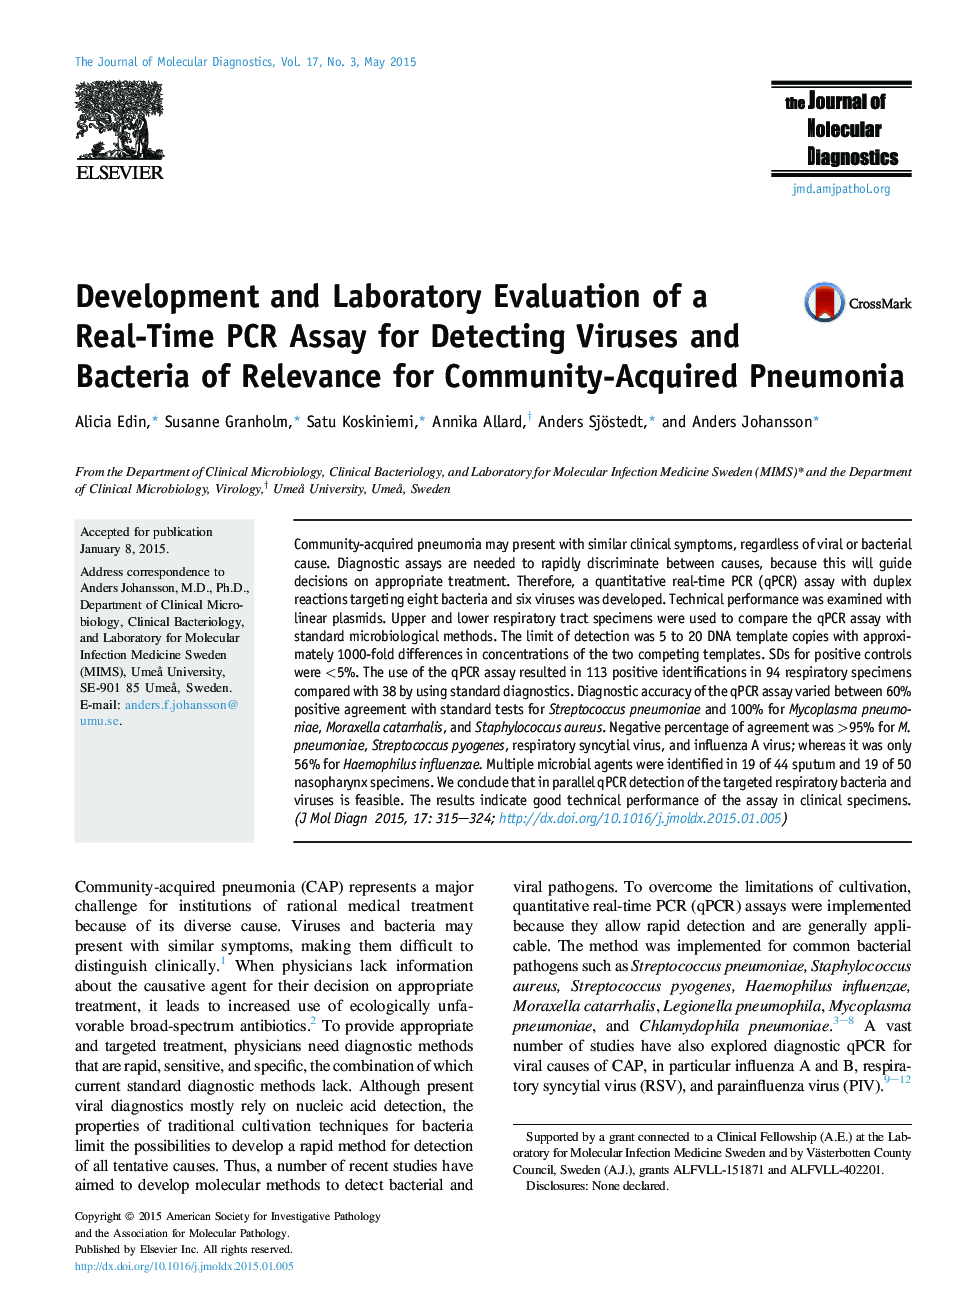 Regular articleDevelopment and Laboratory Evaluation of a Real-Time PCR Assay for Detecting Viruses and Bacteria of Relevance for Community-Acquired Pneumonia